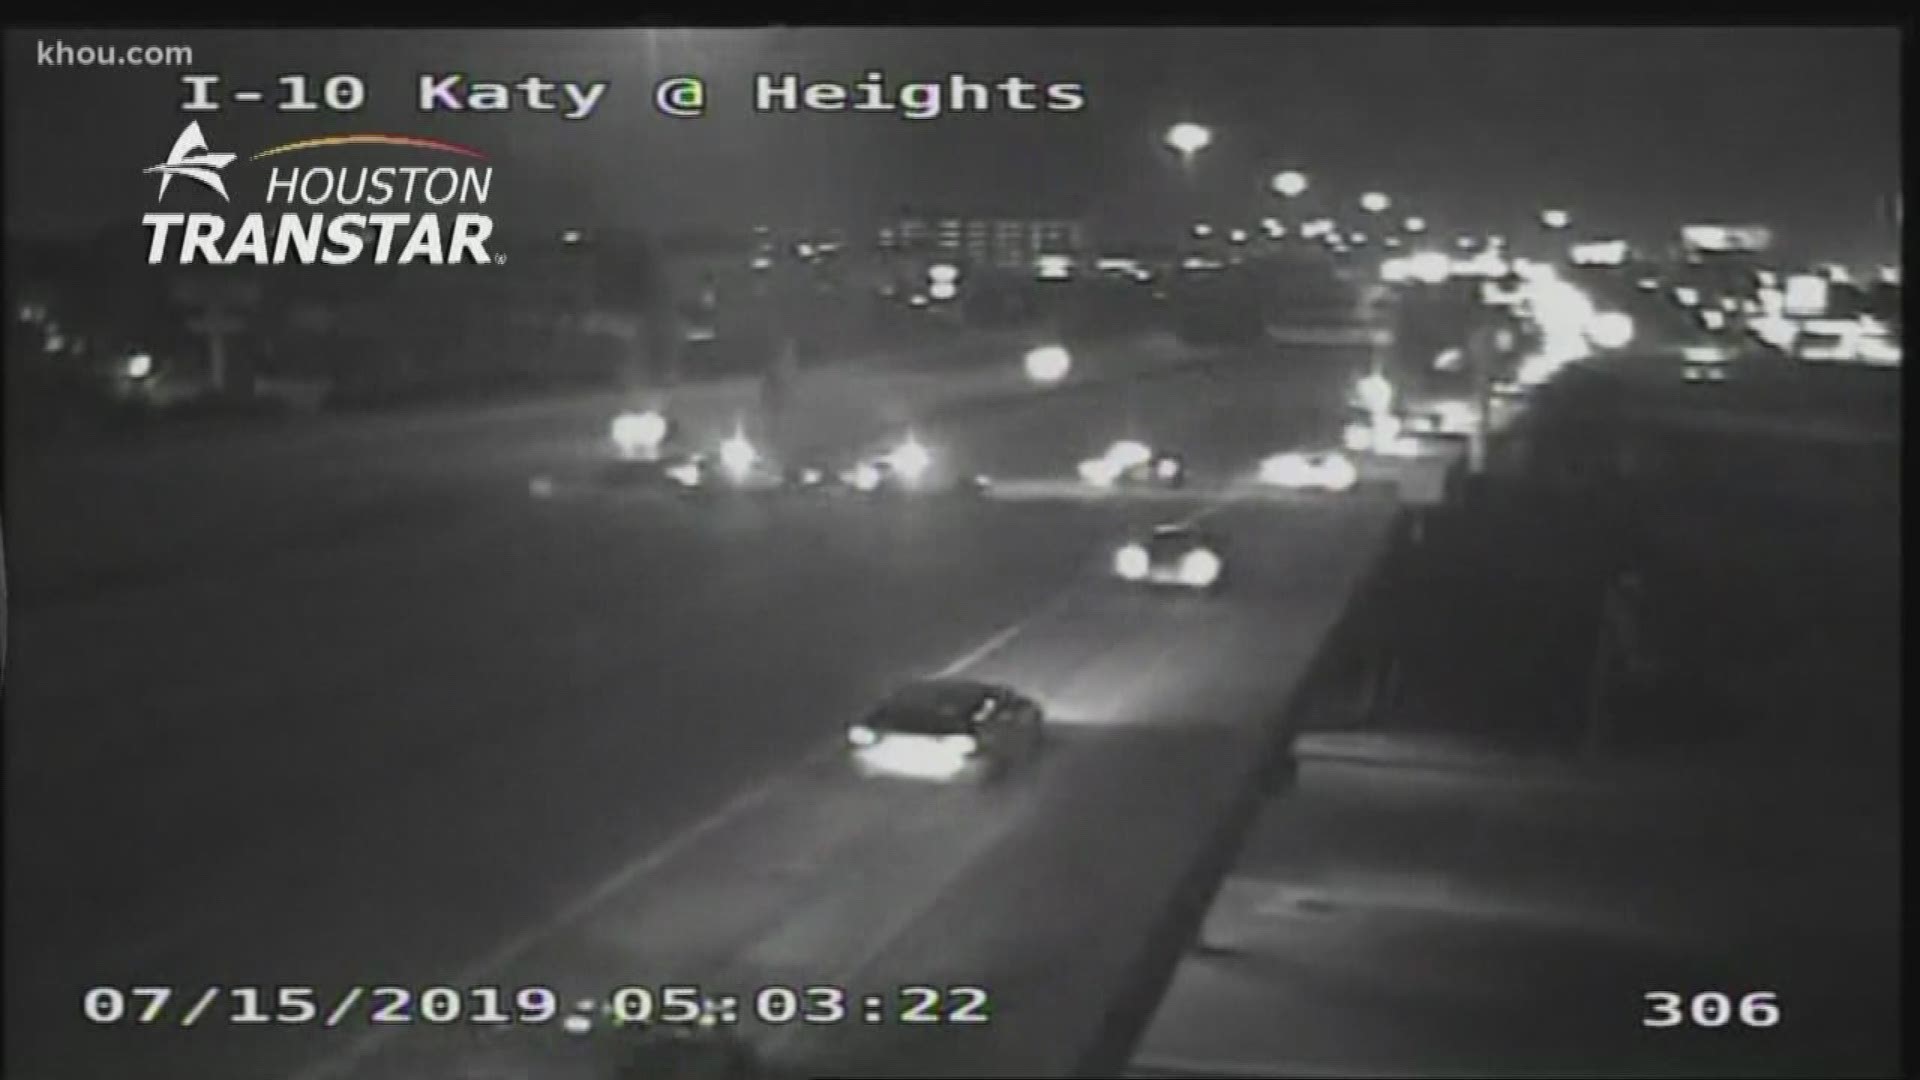 I-10 the Katy Freeway was shut down early Monday after a deadly crash, reported Houston police.